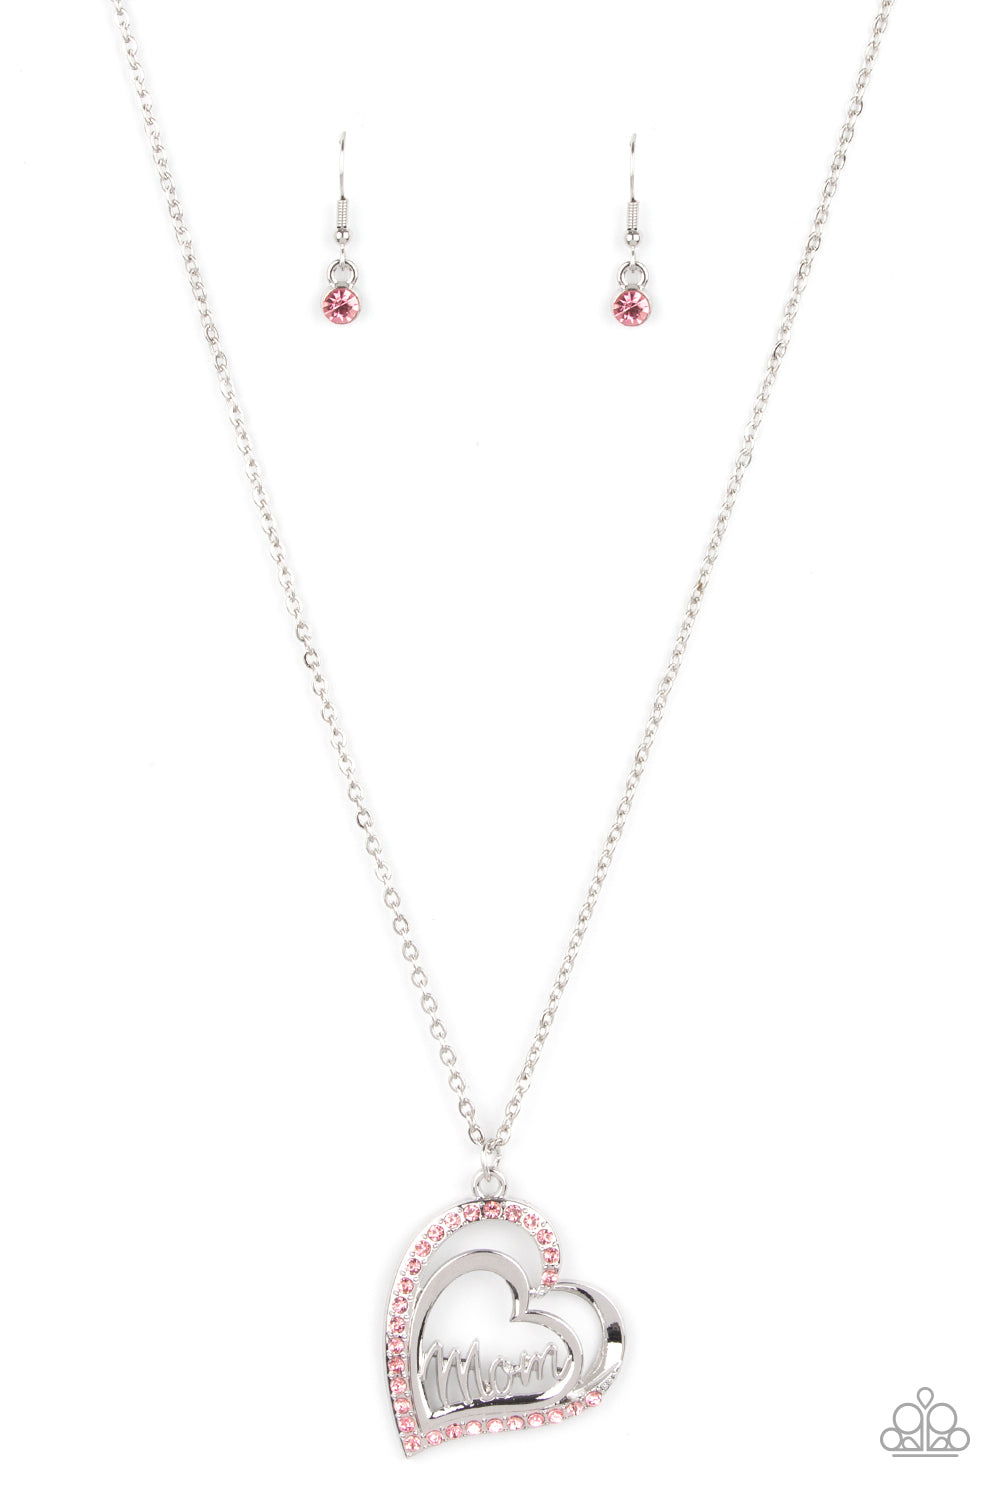 A Mothers Heart Pink Necklace - Paparazzi Accessories  The word "Mom" floats inside an airy heart-shaped frame. A second heart encrusted with brilliant pink rhinestones encircles the centerpiece as it sways from a lengthened silver chain for a sweet token of love. Features an adjustable clasp closure.  Sold as one individual necklace. Includes one pair of matching earrings.